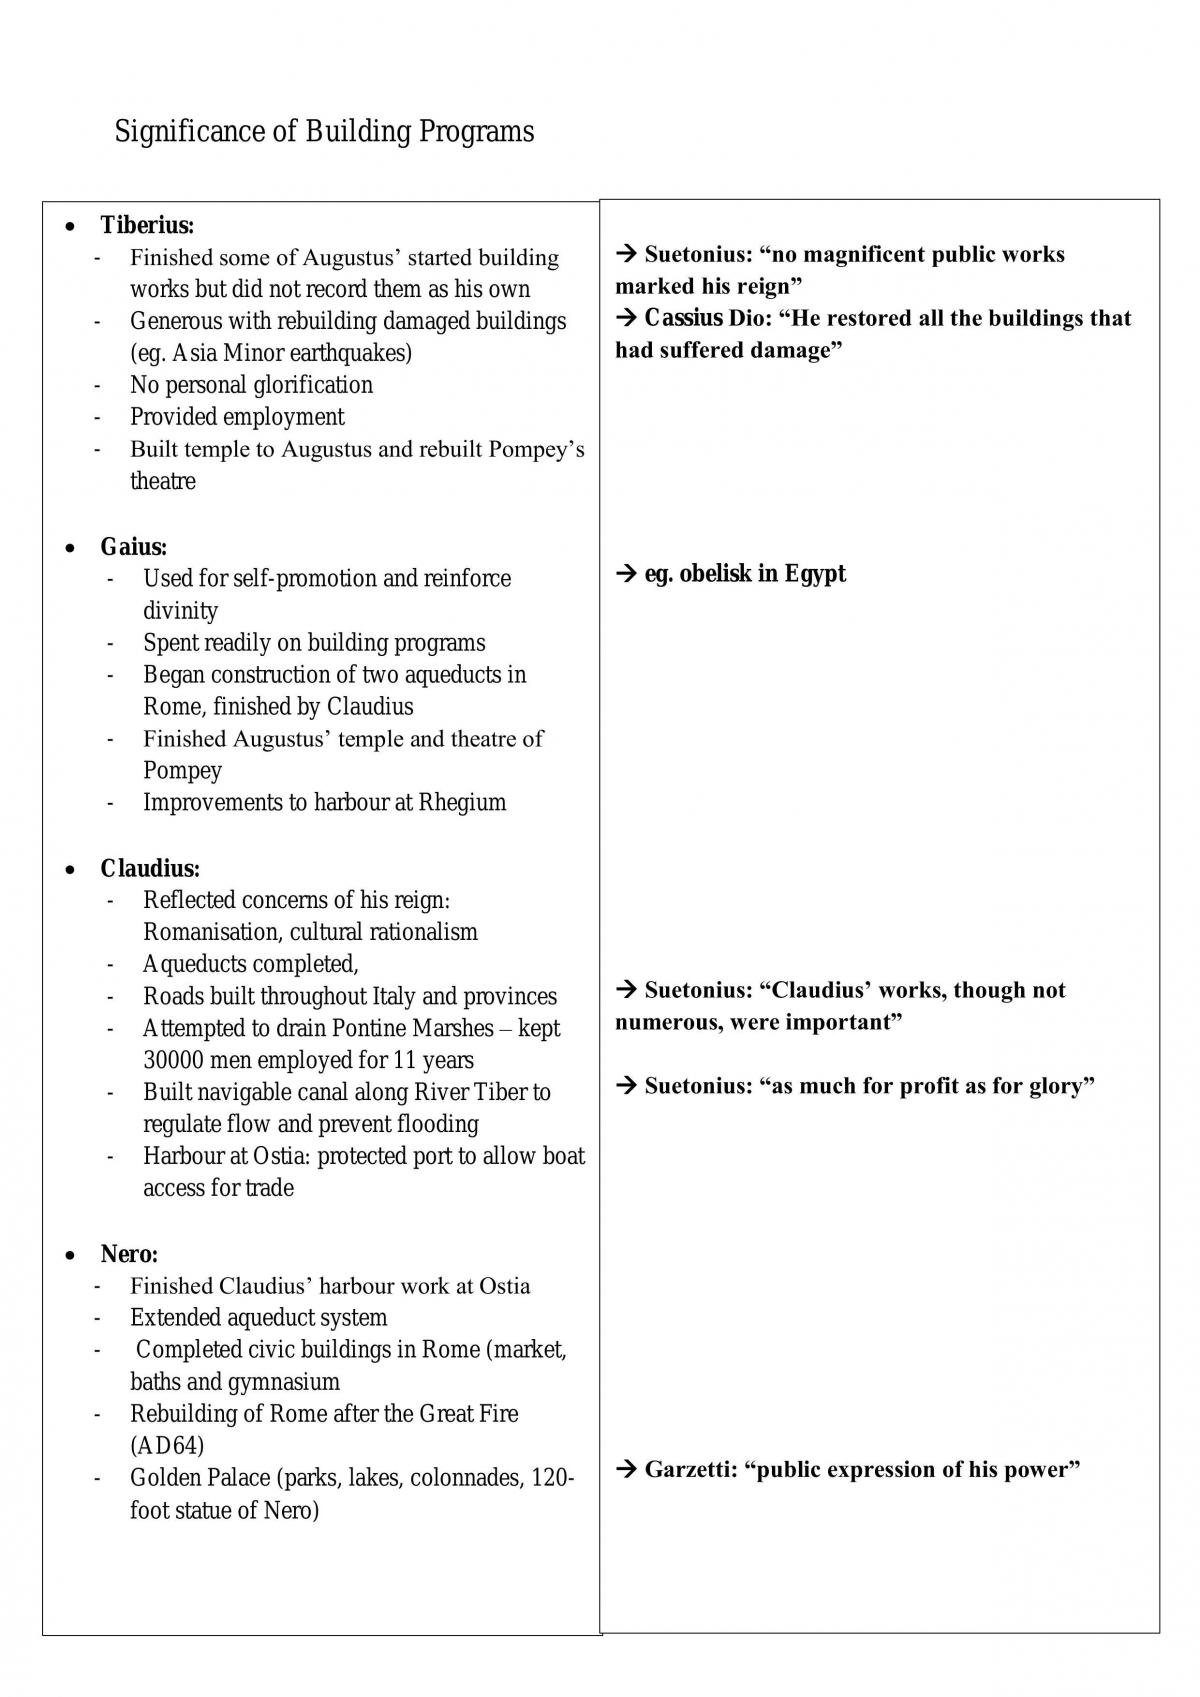 HSC Ancient History Notes Julio Claudian Era - Page 16